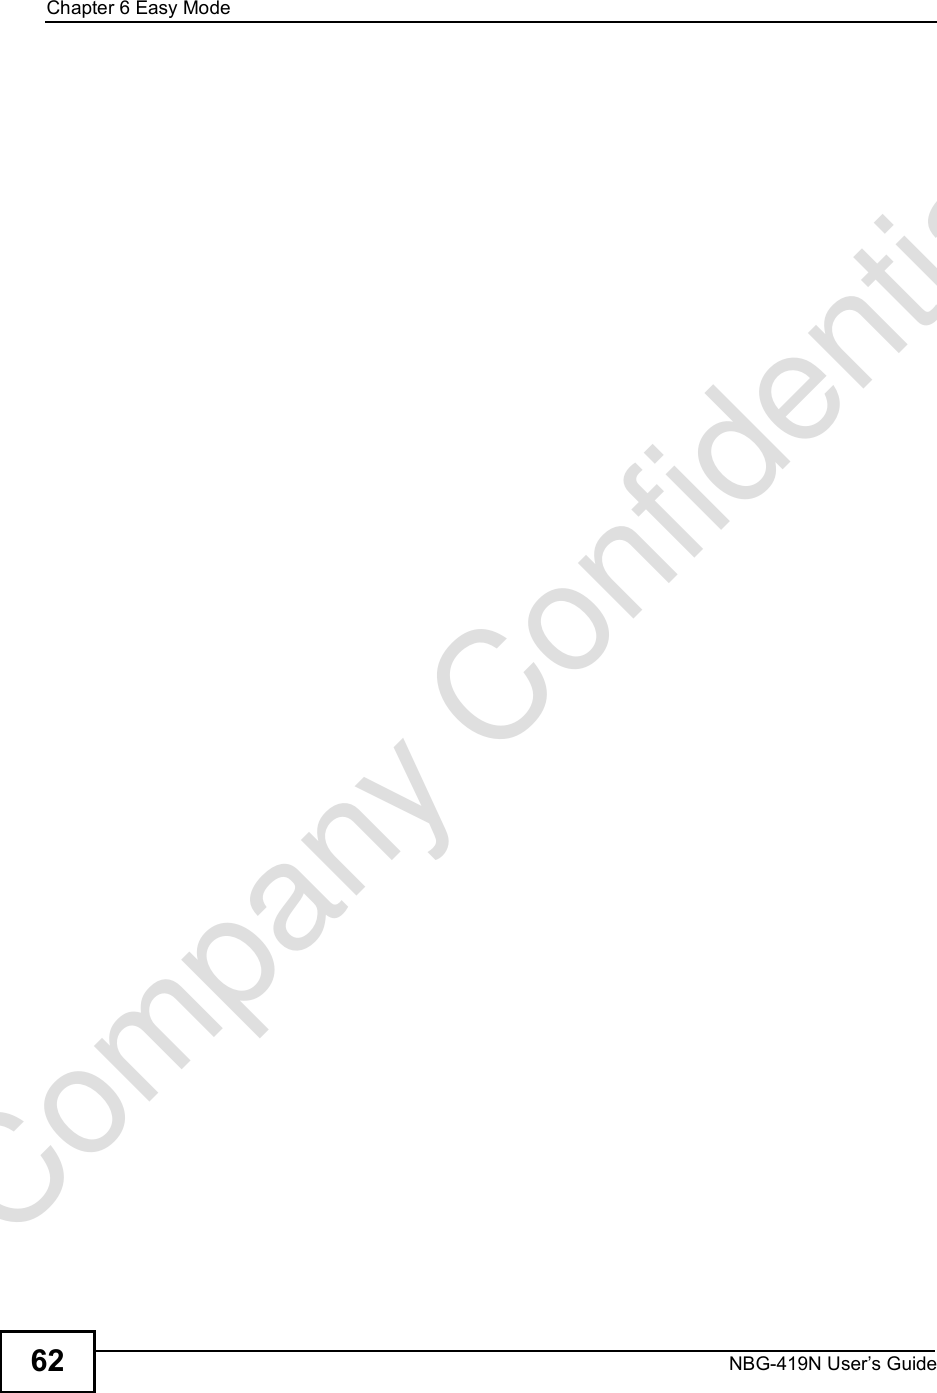 Chapter 6Easy ModeNBG-419N User s Guide62Company Confidential